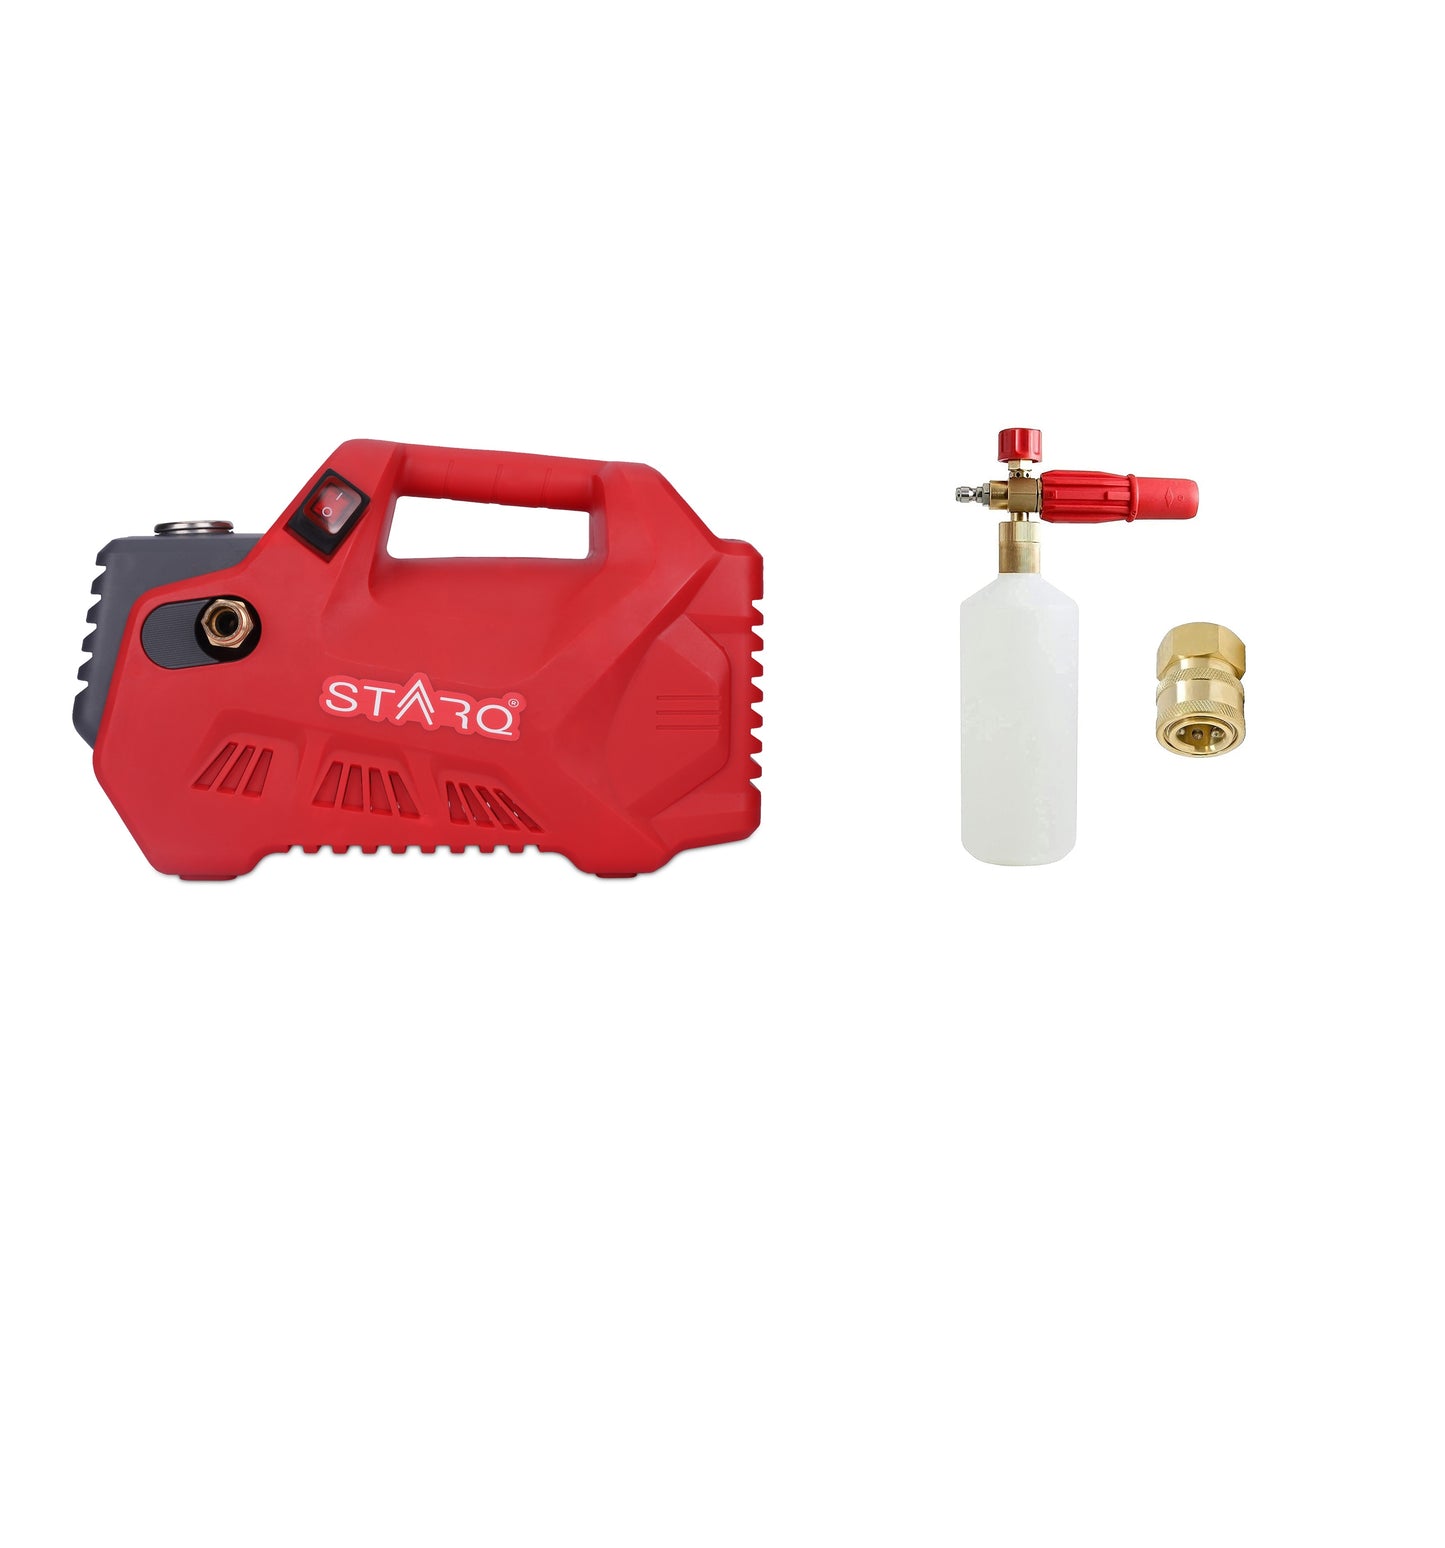 STARQ® W8 2800W | 280 Bar | Portable Heavy Duty High Pressure Washer/ Cleaner | Red (Combo)